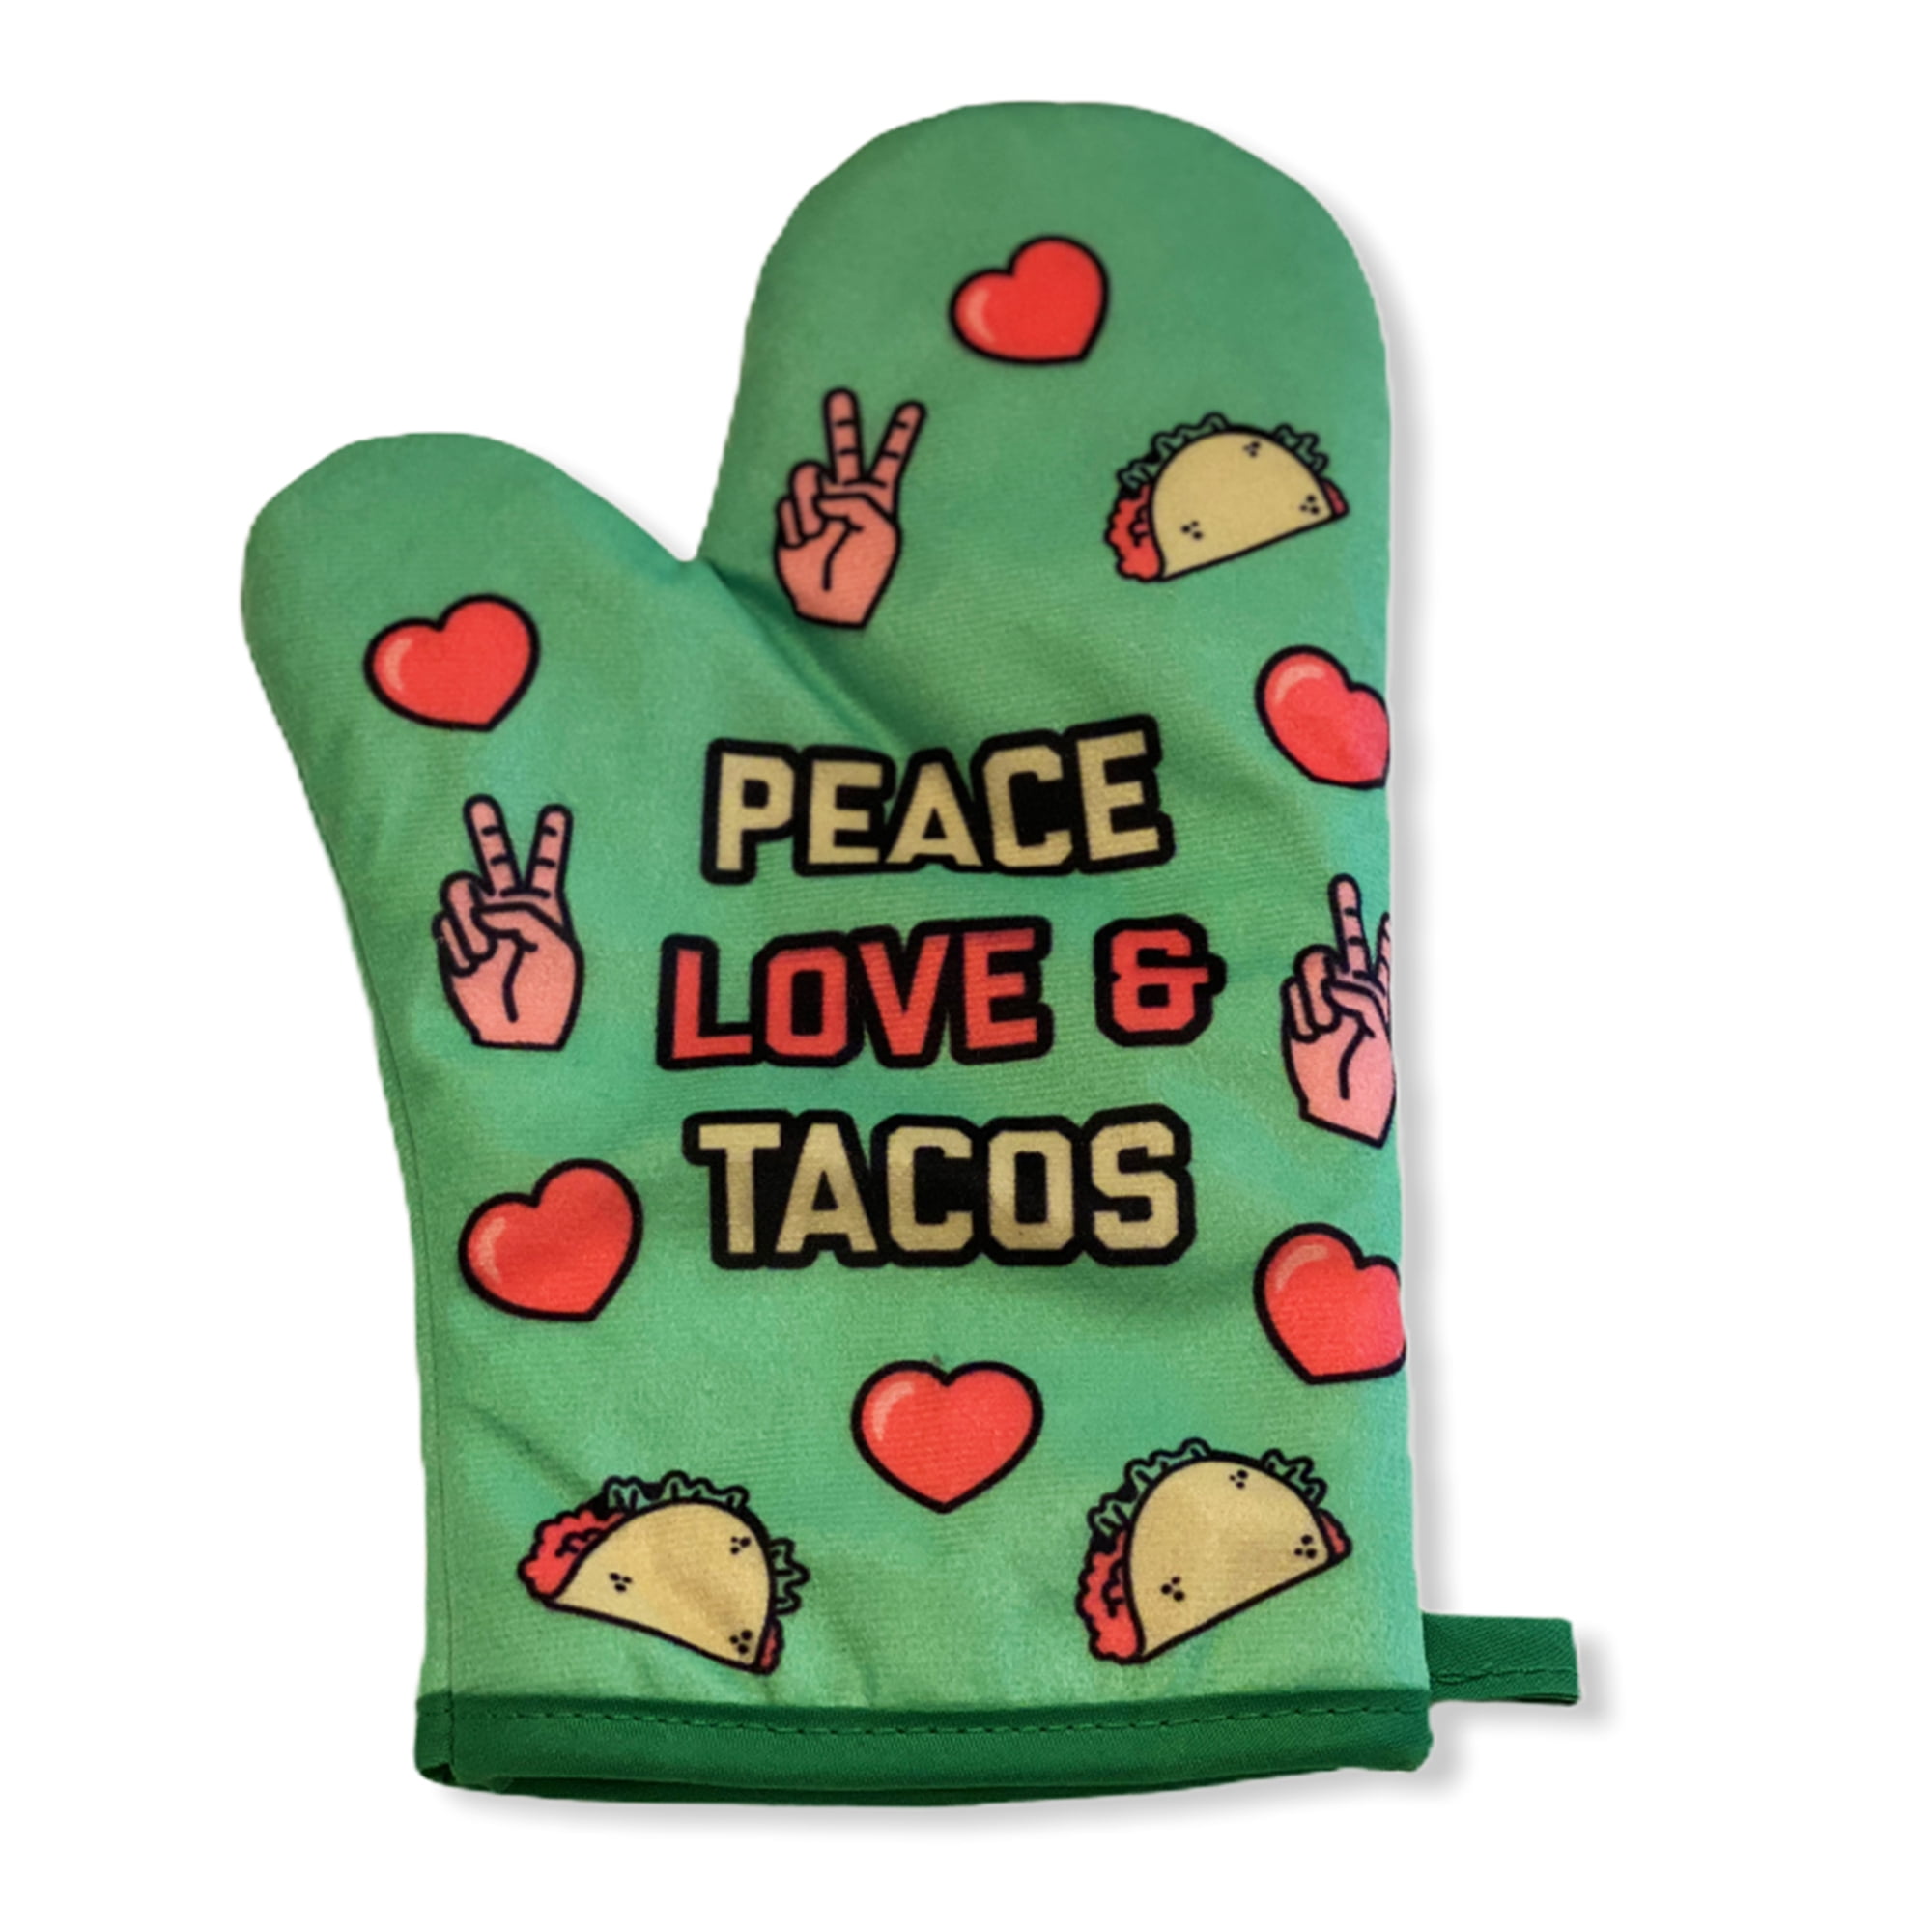 Peace Love Tacos Funny Graphic Novelty Kitchen Accessories (Oven Mitt) -  